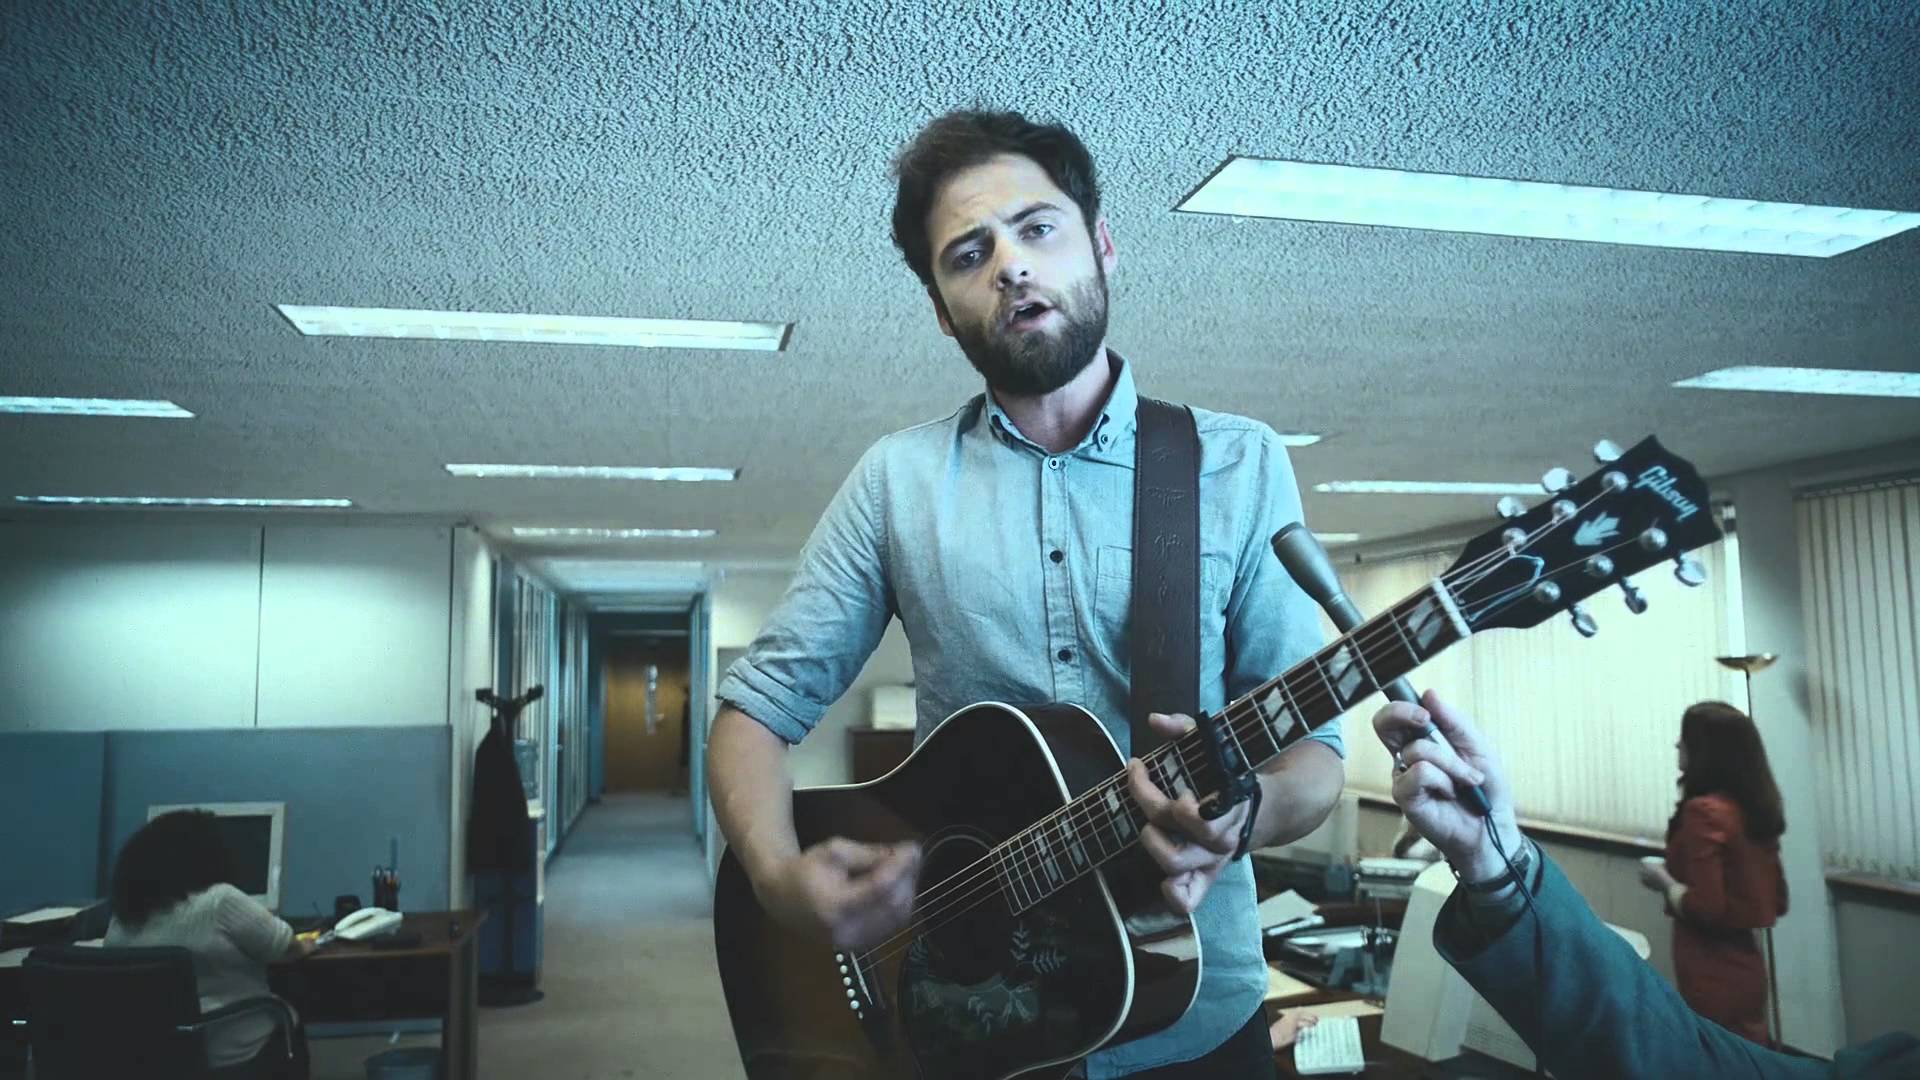 Passenger: 5 most underrated songs